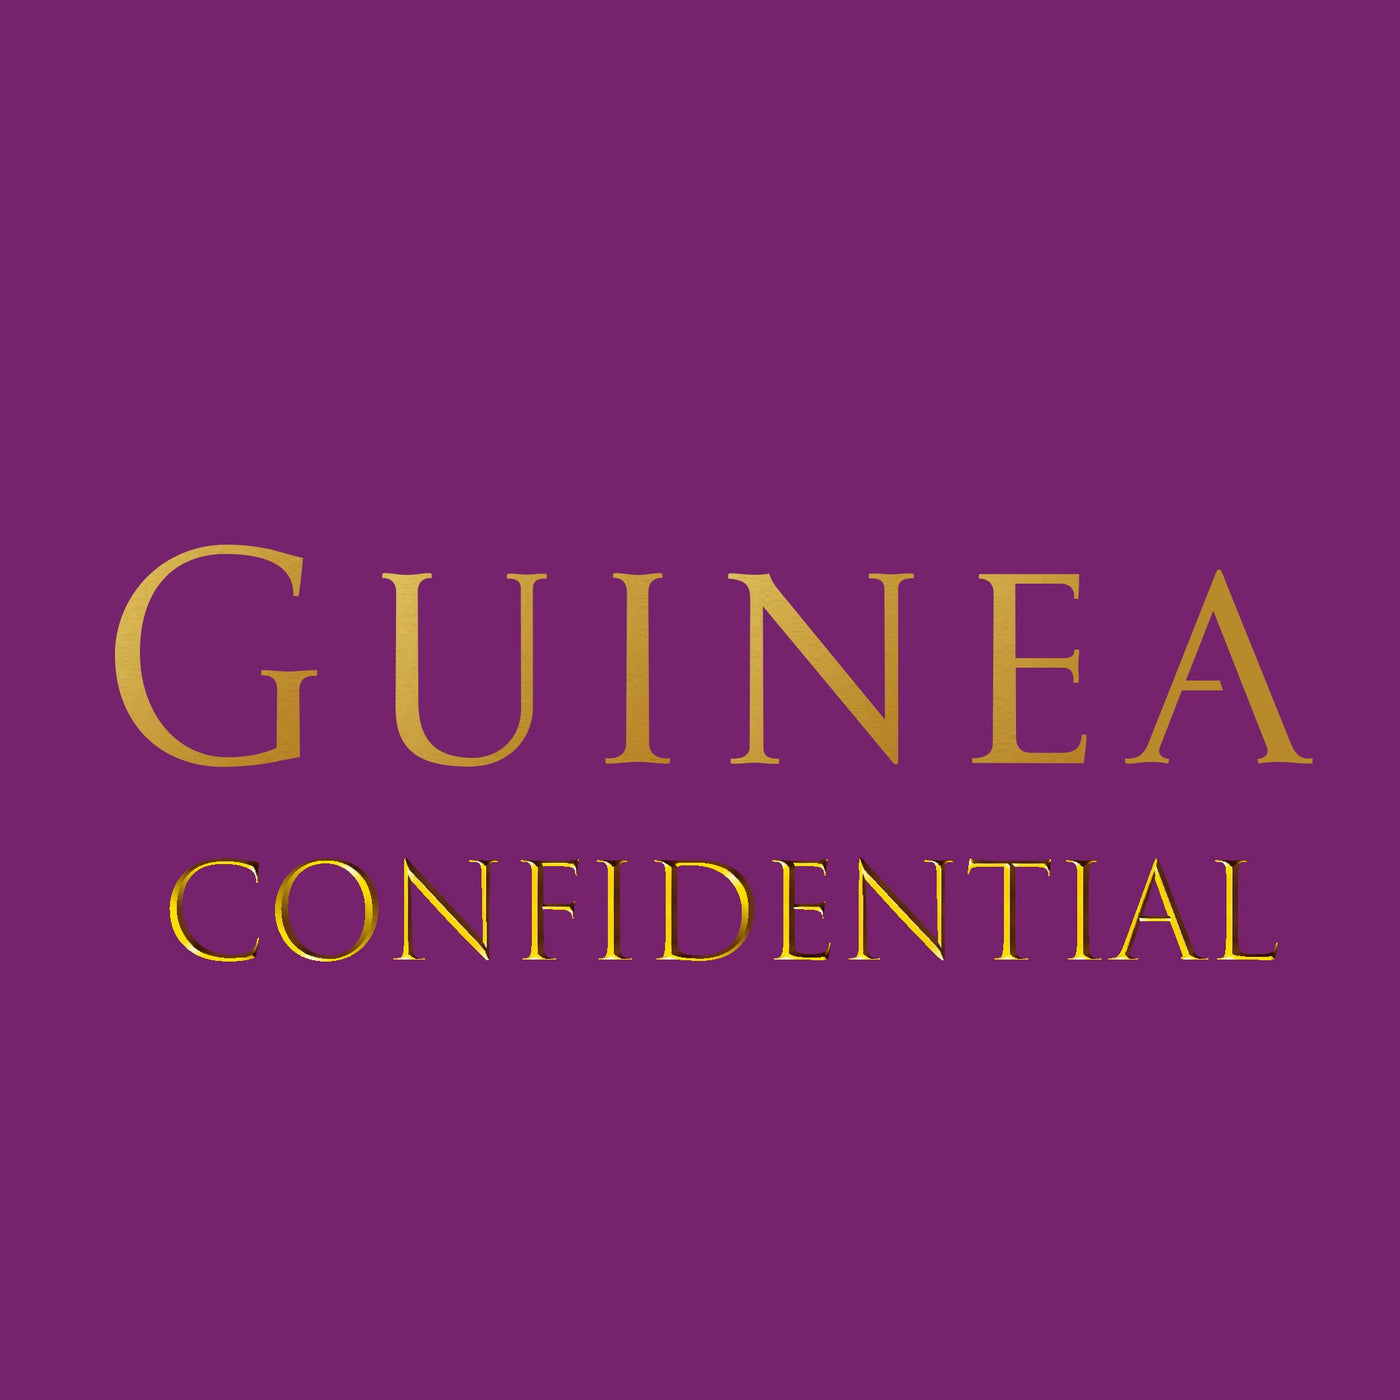 Gold Guinea Confidential writing on purple background